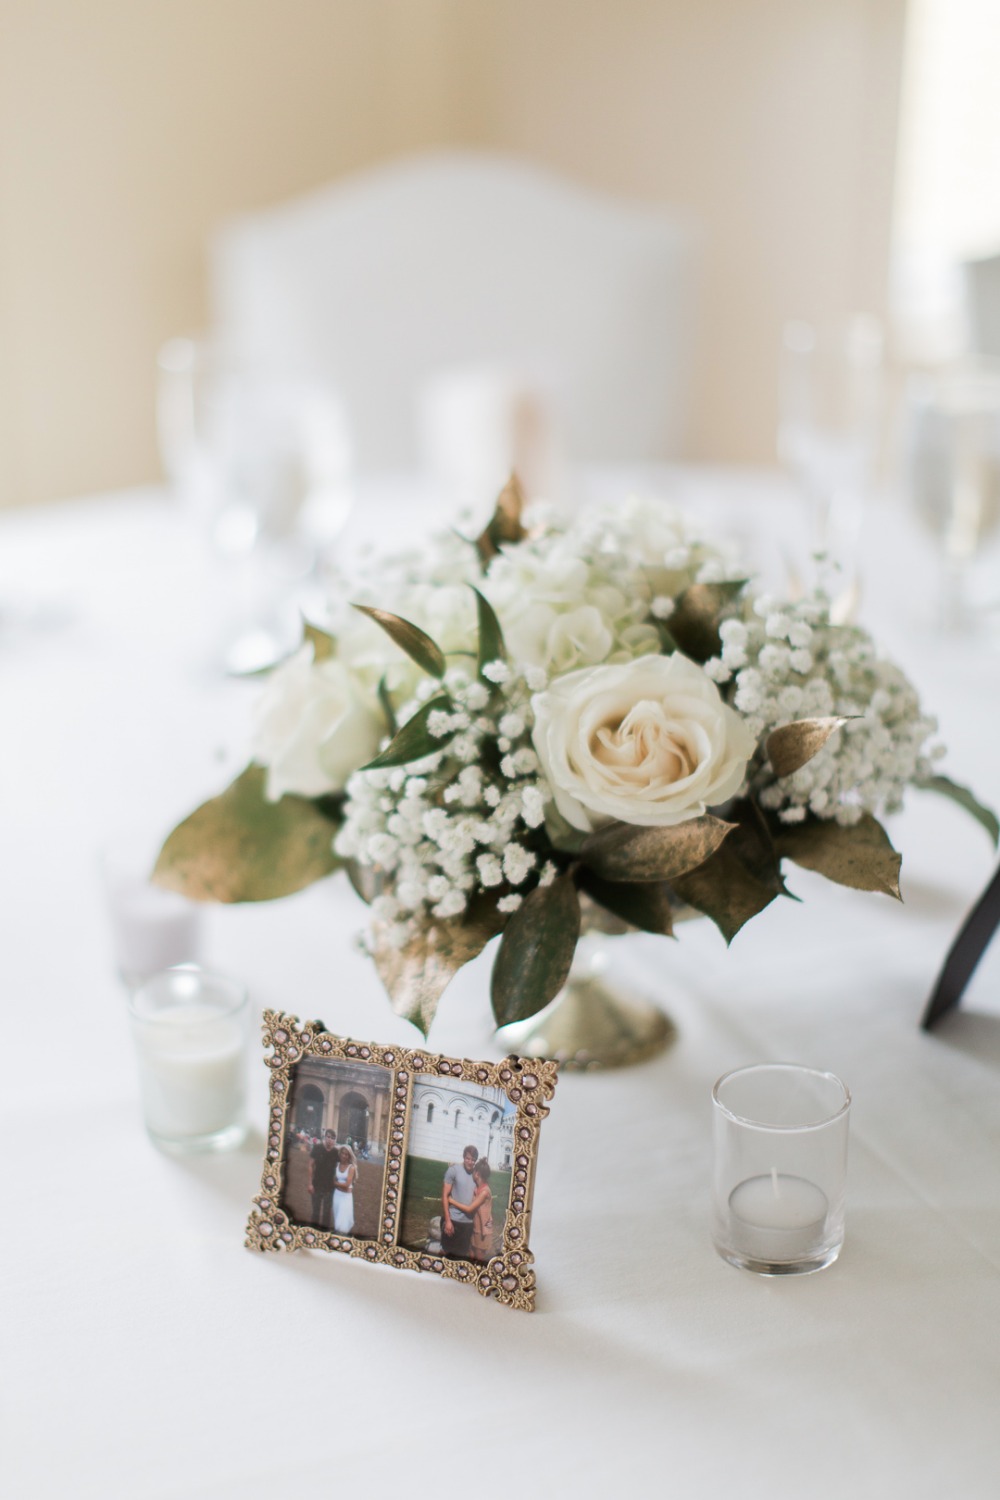 Picture and floral centerpiece